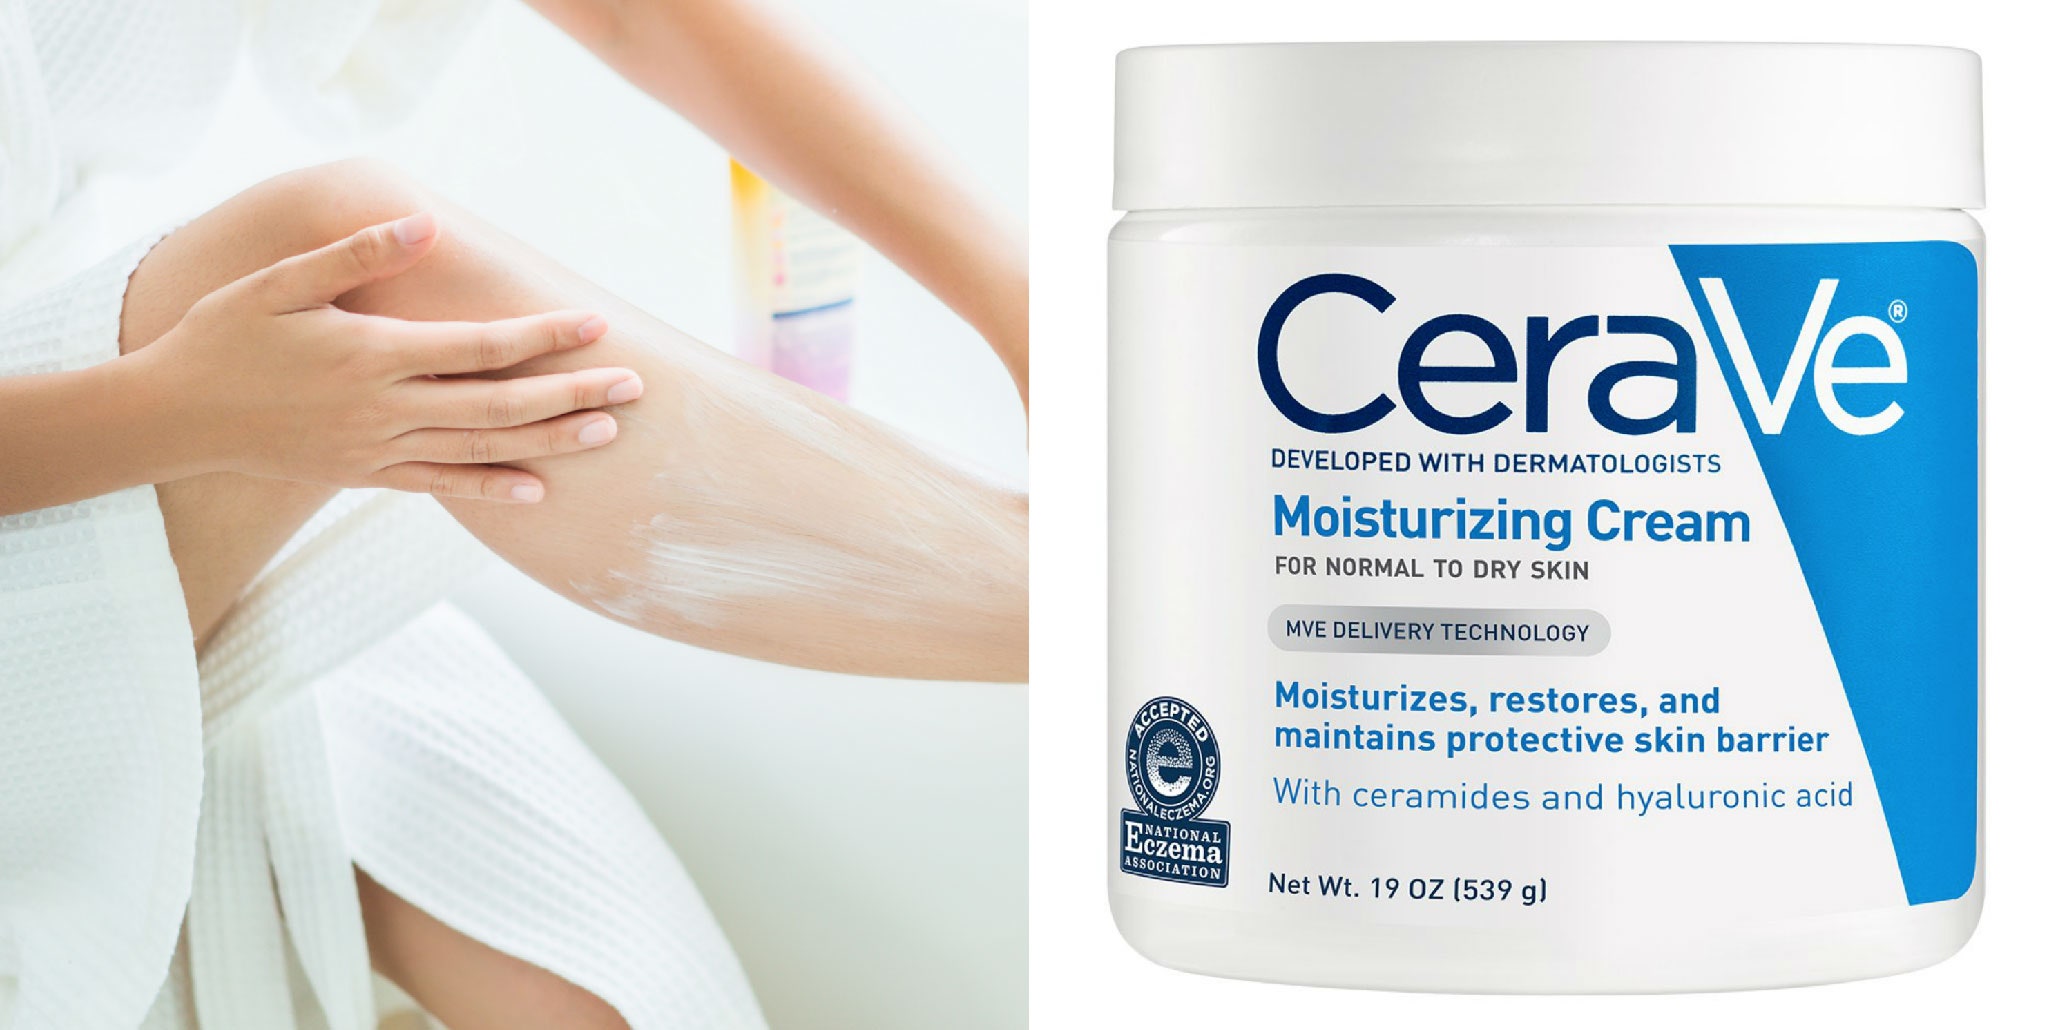 CeraVe’s Moisturizing Cream Soothes My Chronically Dry Skin Like a Soft Blanket